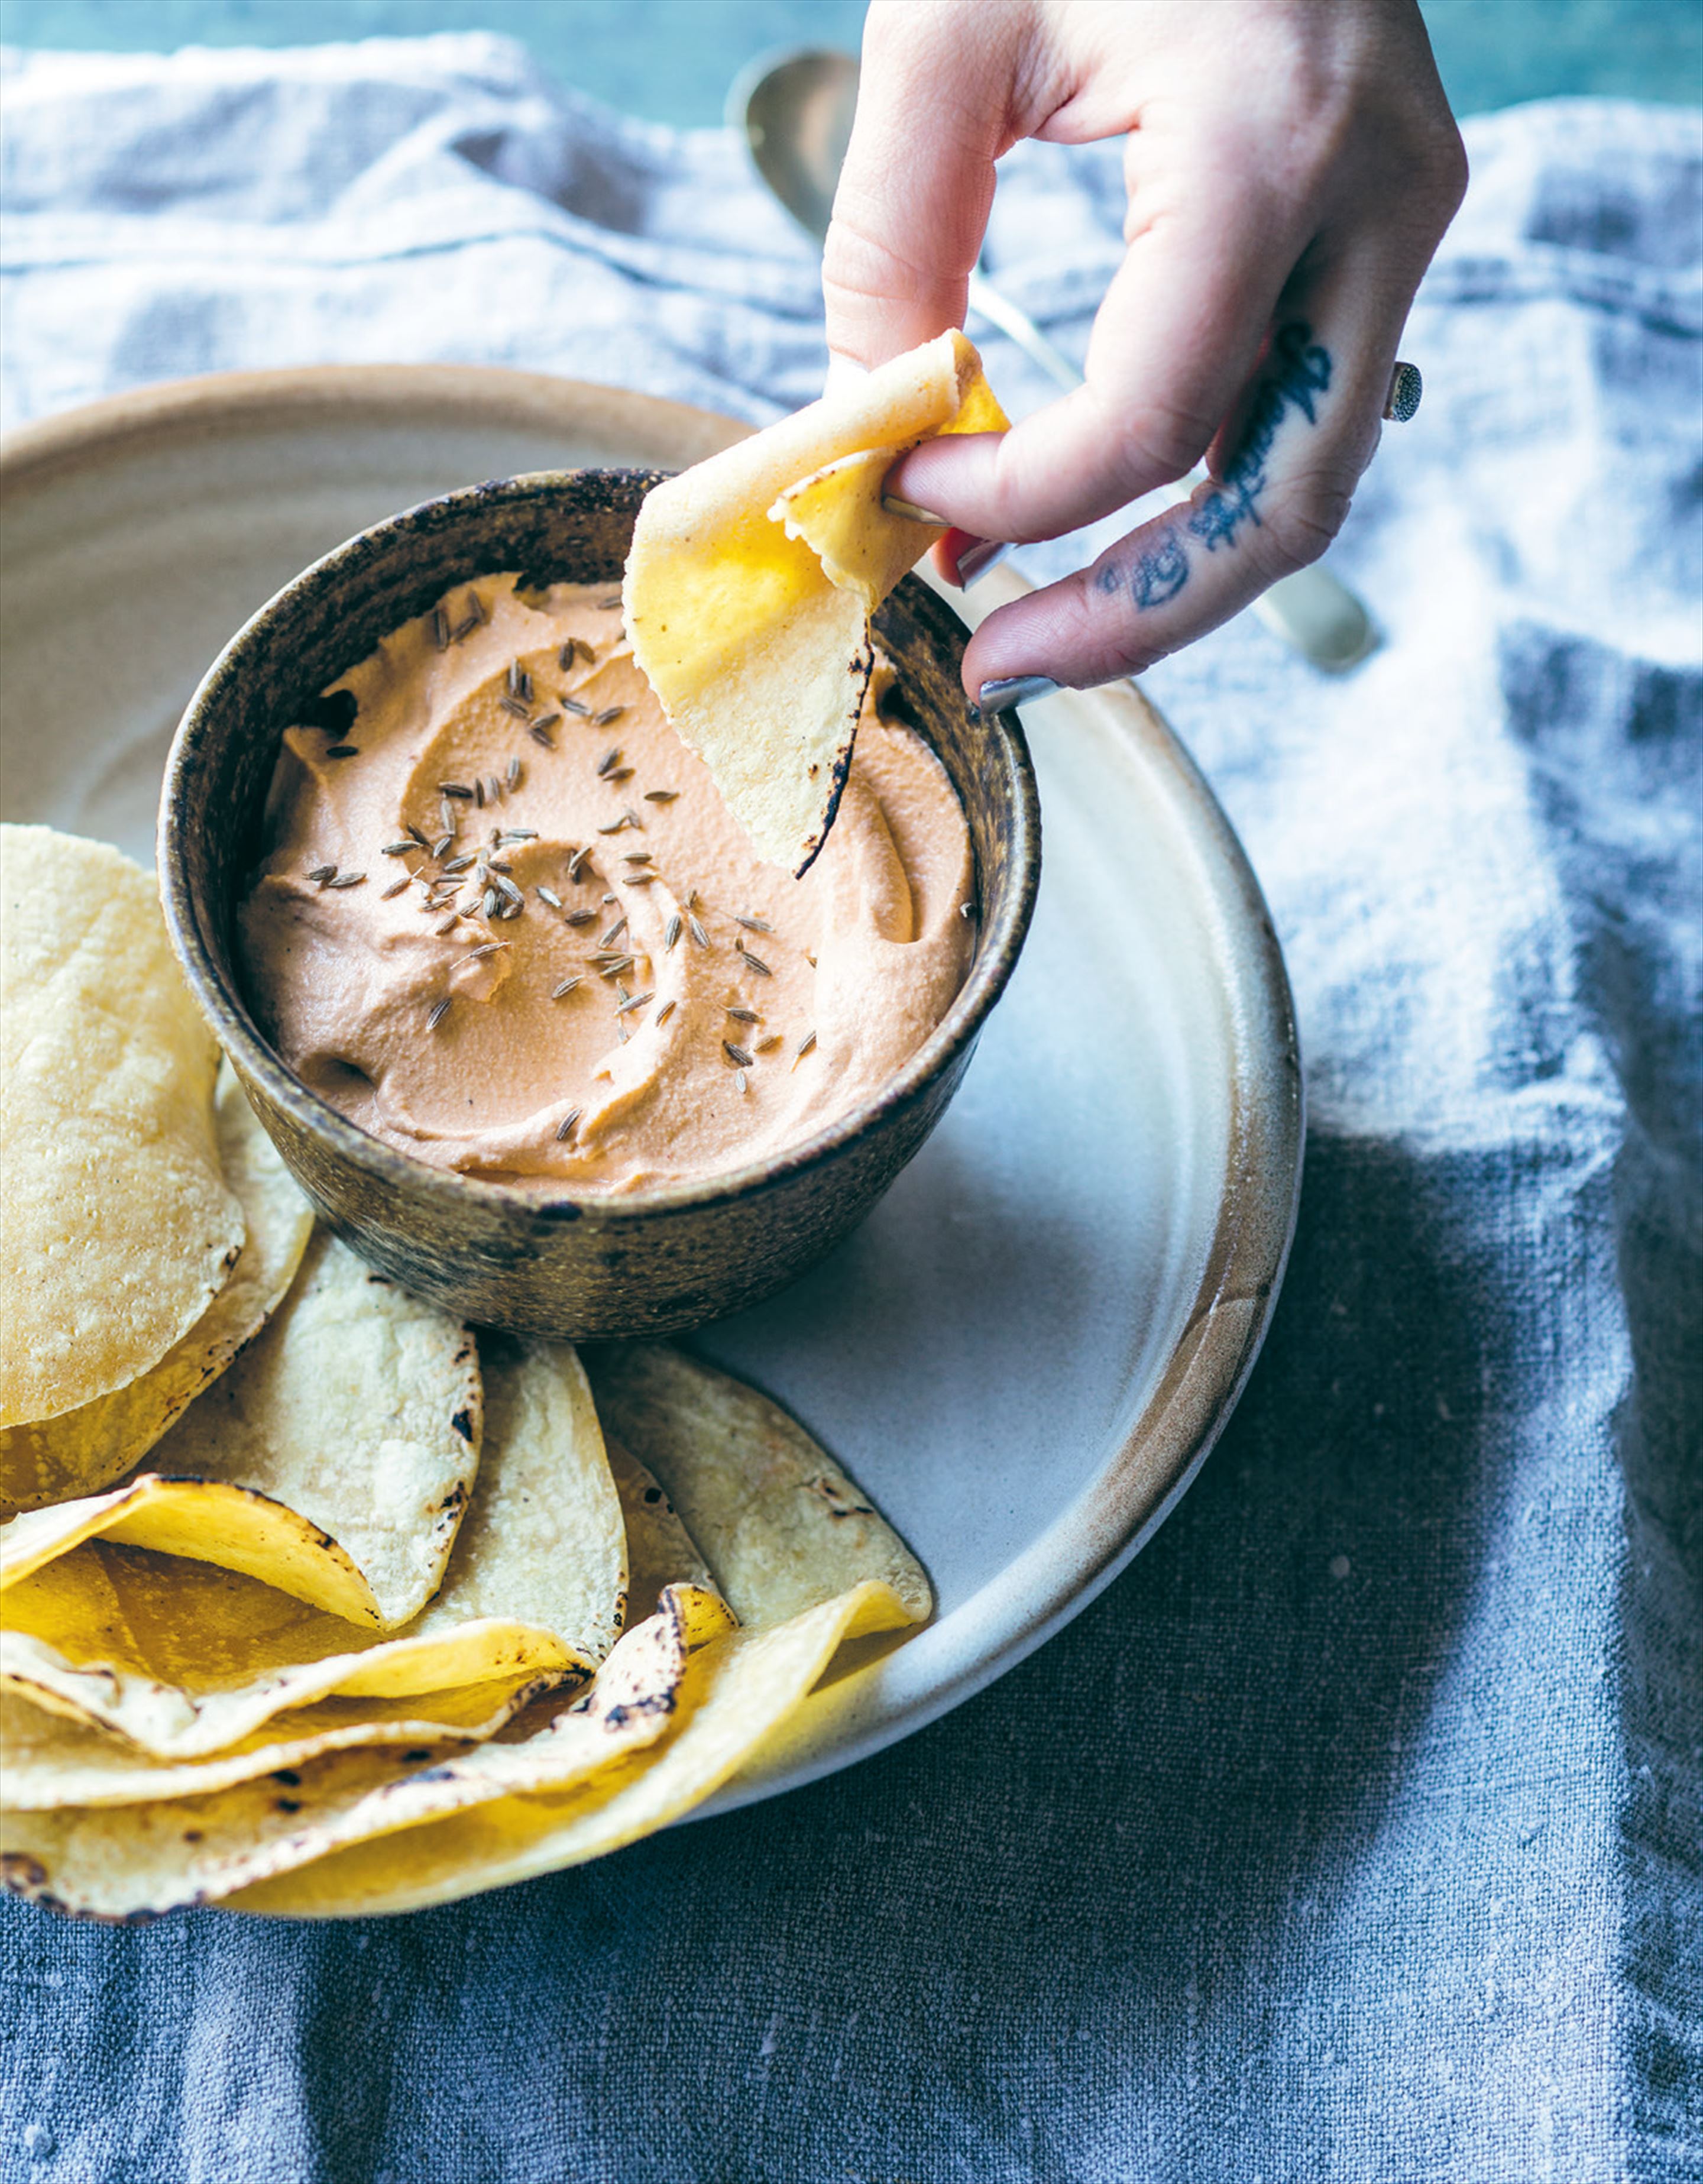 Chipotle cashew cheese